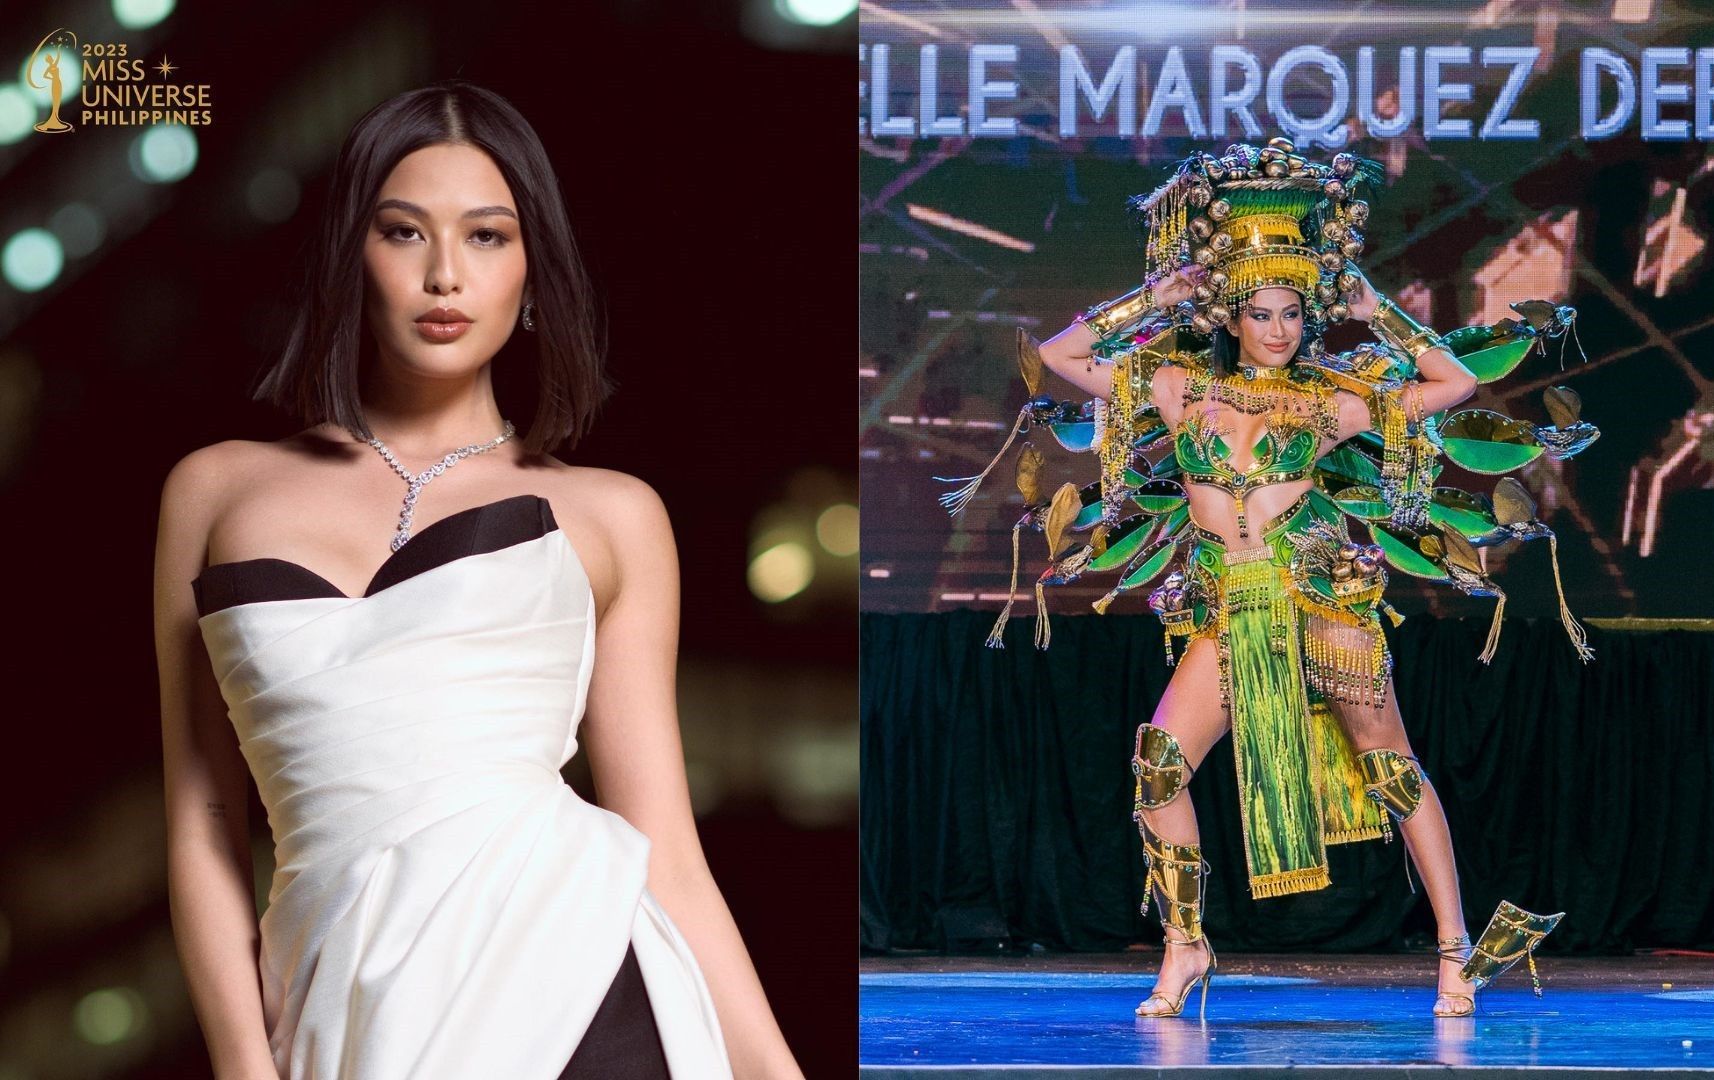 Michelle Dee Daughter Of Melanie Marquez Is Crowned Miss Universe Philippines 2023